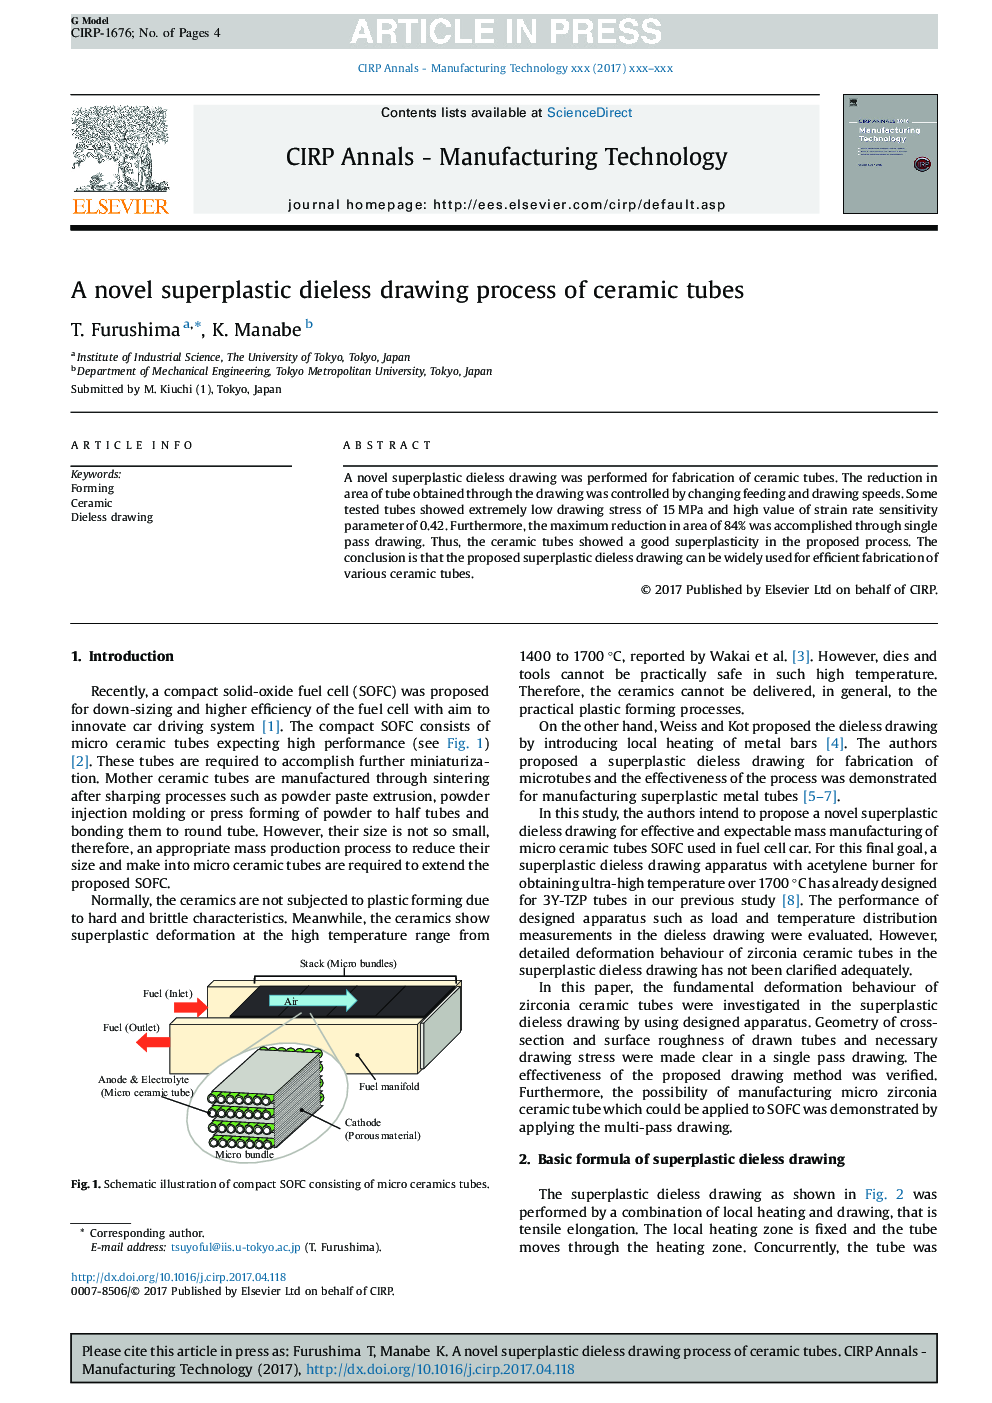 A novel superplastic dieless drawing process of ceramic tubes